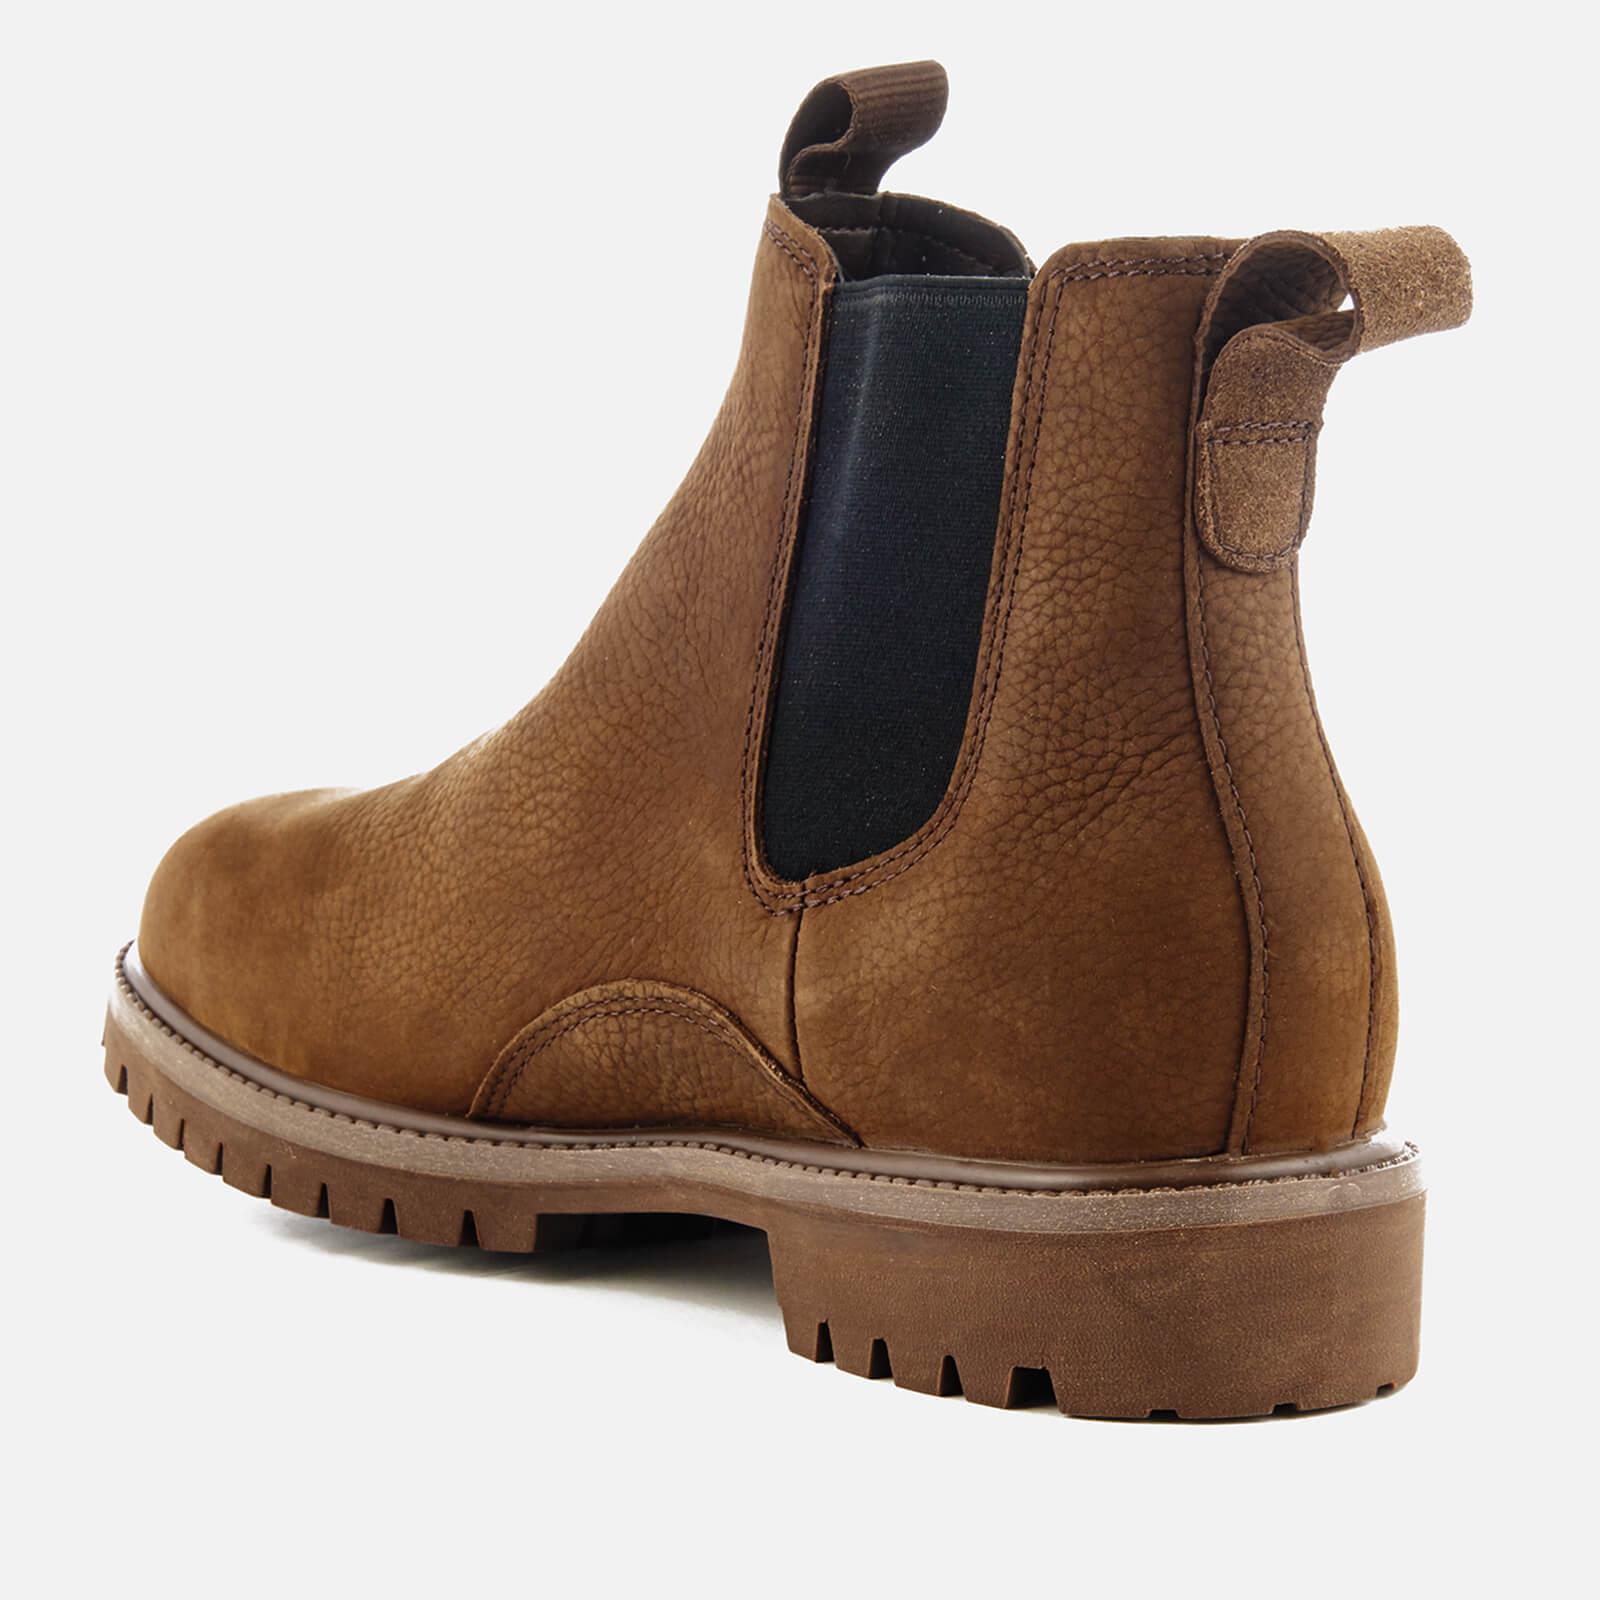 Timberland Rubber 6 Inch Premium Chelsea Boots in Brown for Men - Lyst